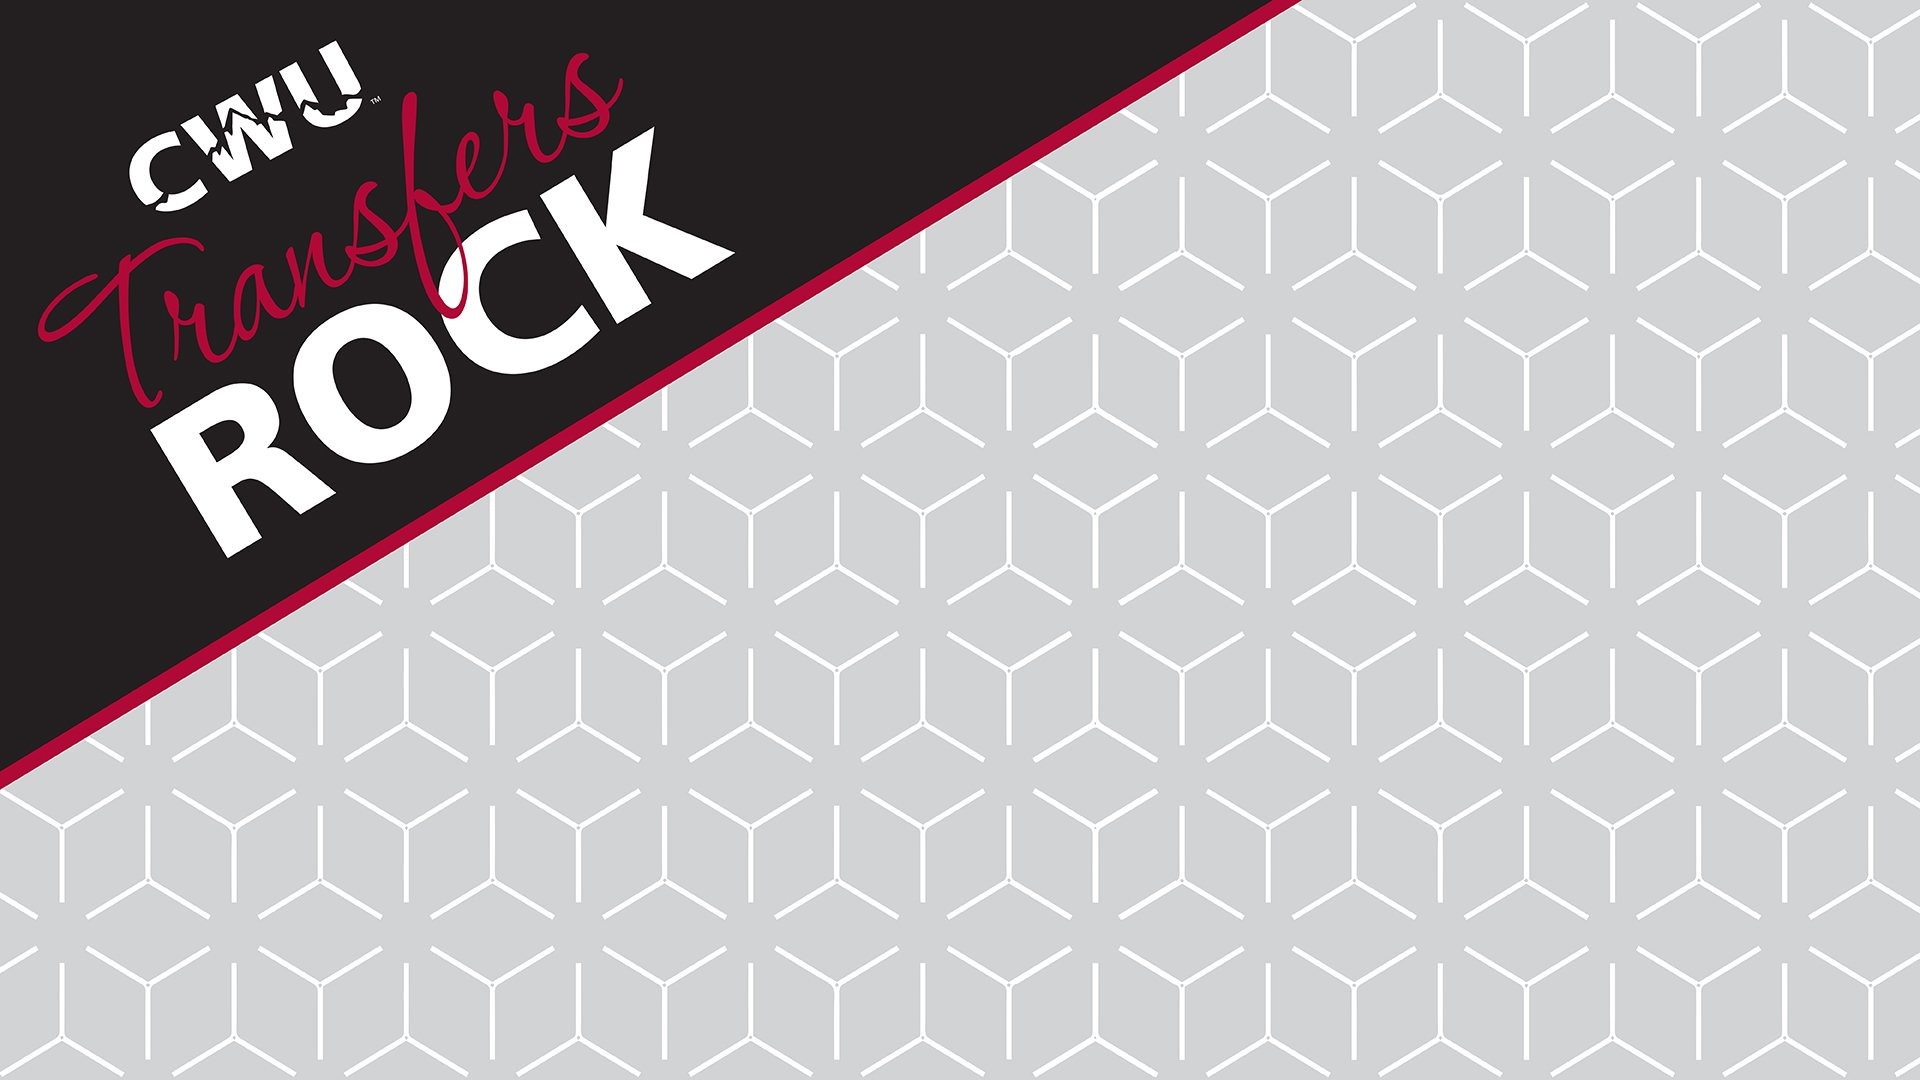 A light gray patterned background of grey squares with a triangular label saying "CWU Transfers ROCK" in the top left corner.